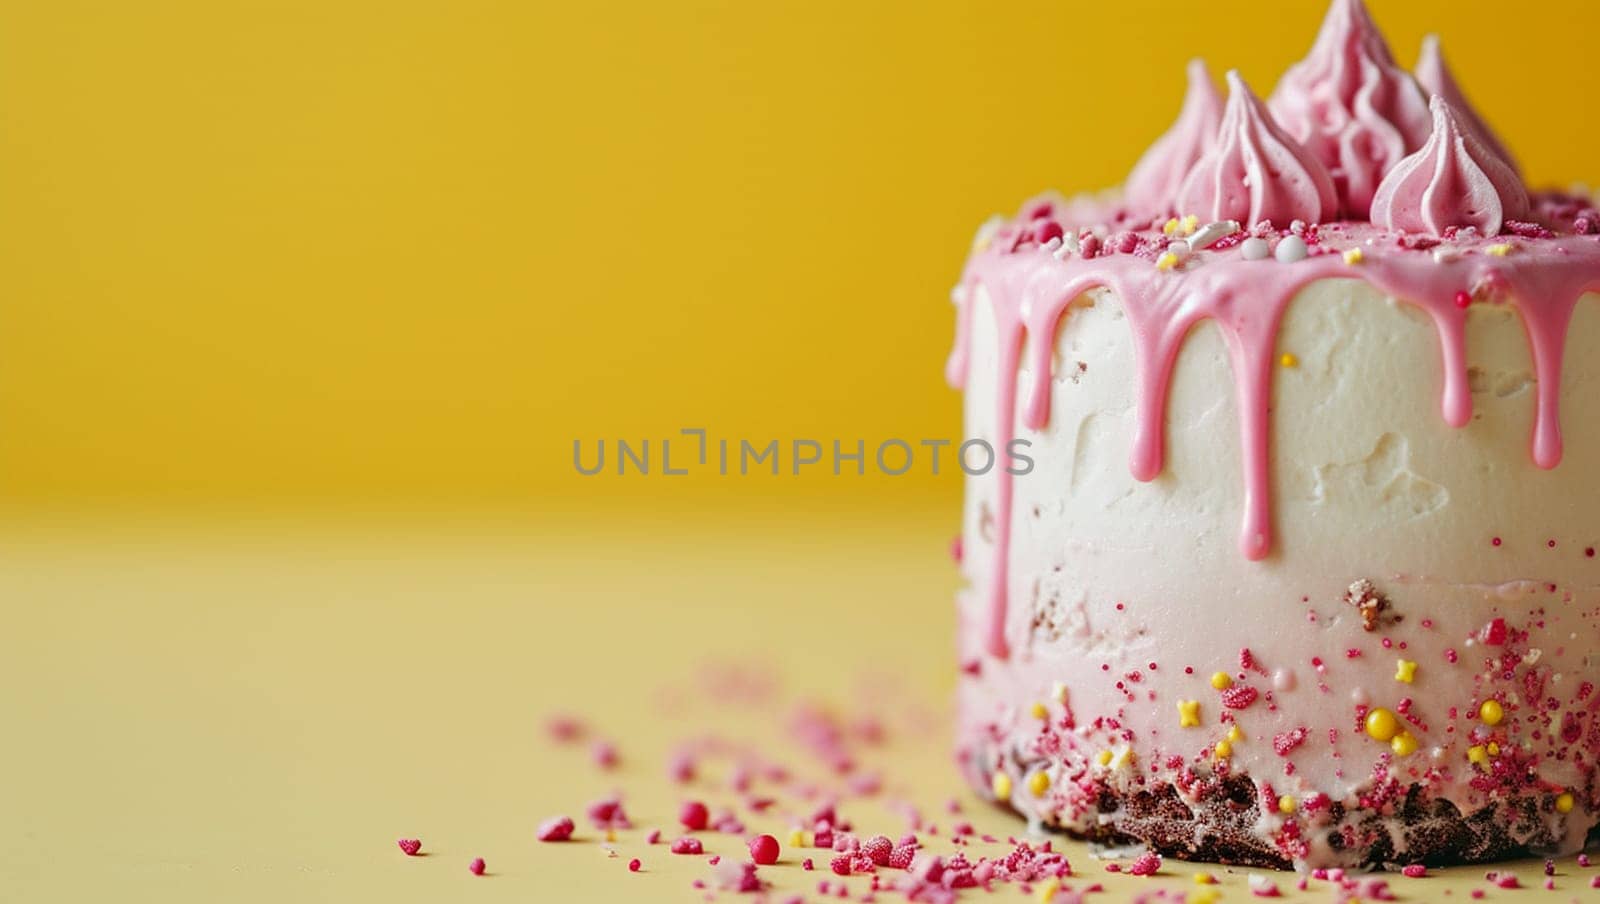 A delicious, delicate cake with the inscription Happy Birthday. A birthday dessert that looks beautiful and appetizing. High quality photo